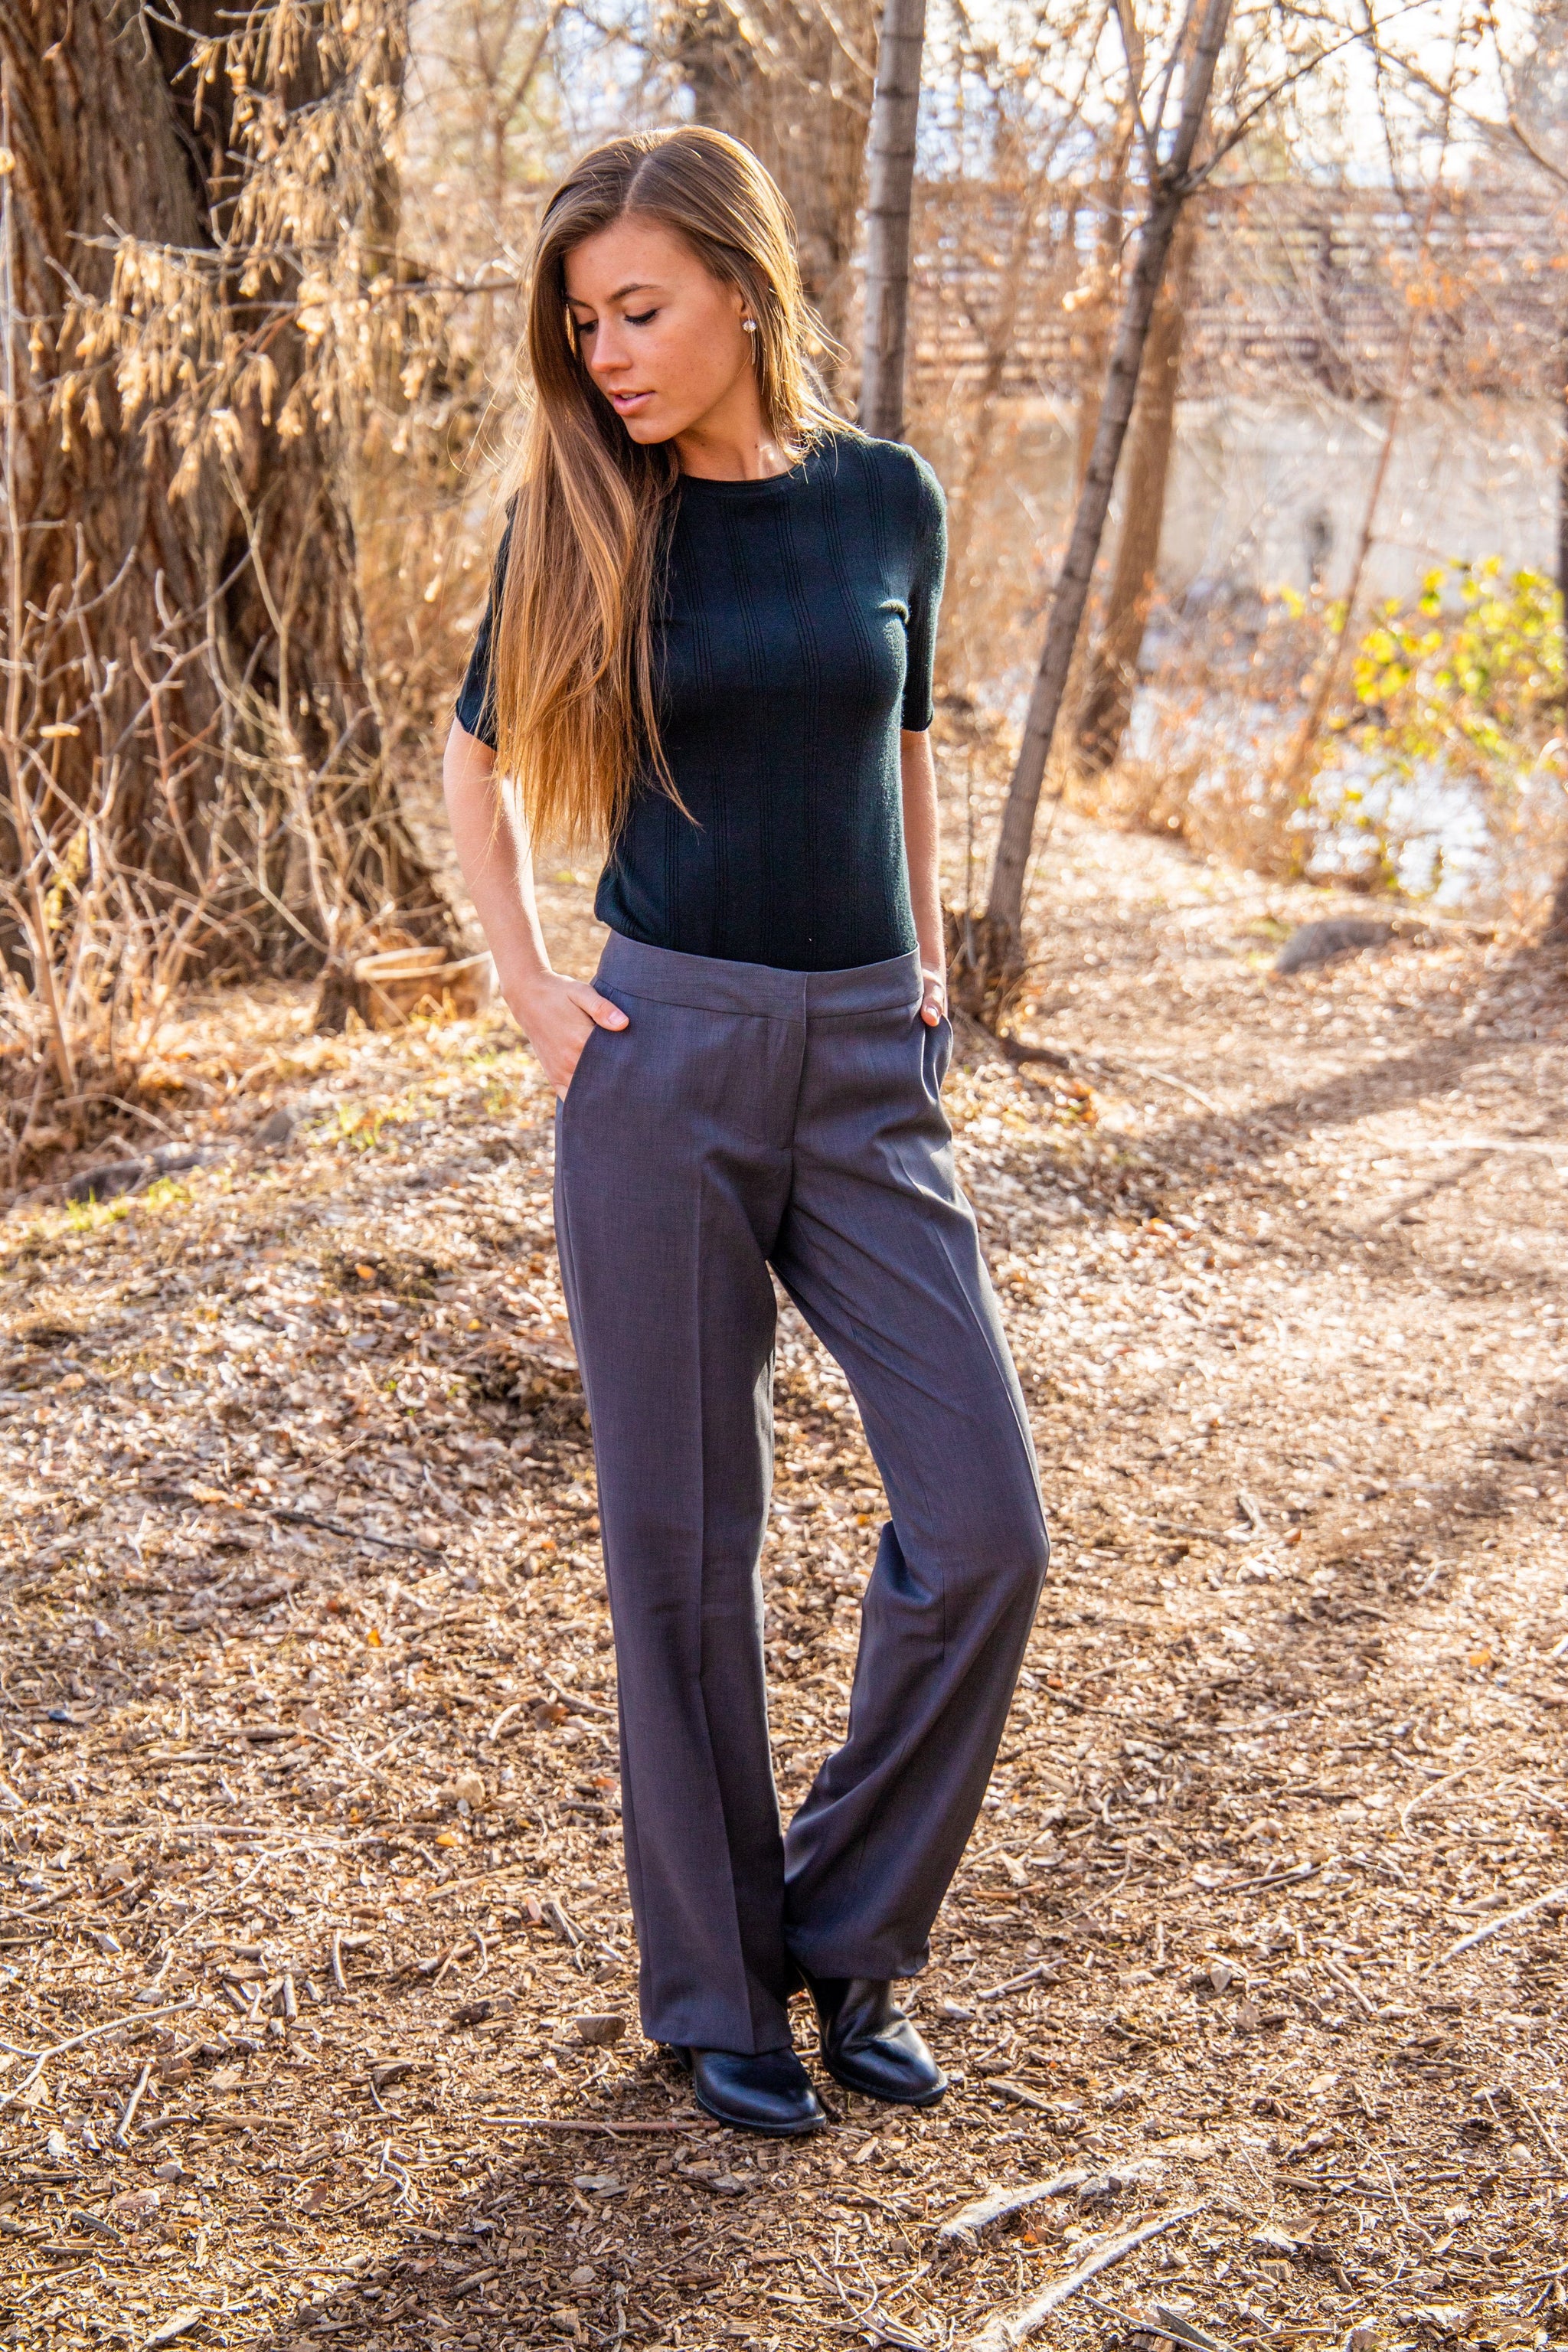 Betabrand Button Fly Dress Pants for Women